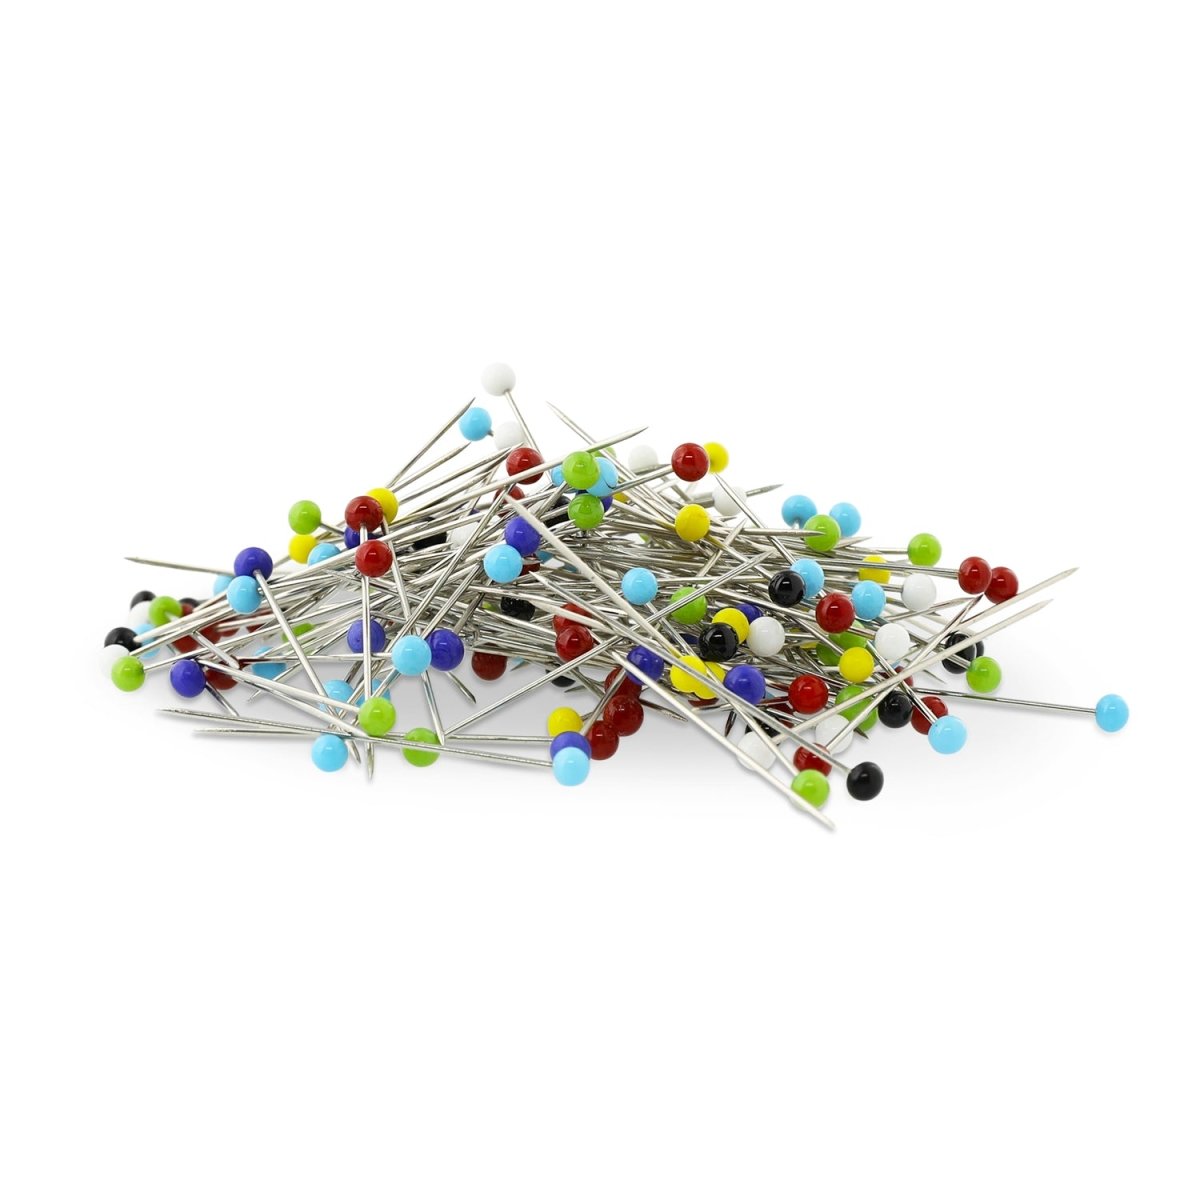 Picture of a pile of Glass Head Pins